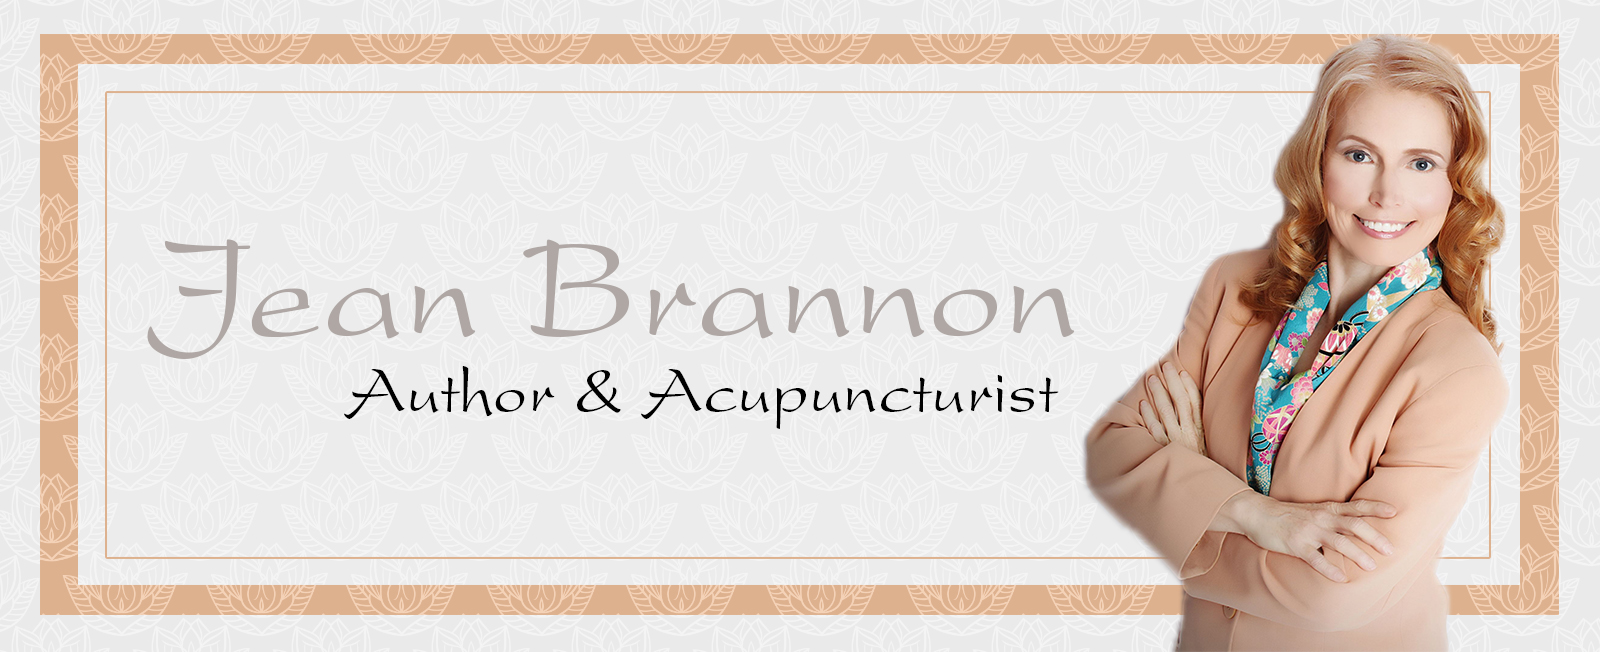 The Latest From Jean Jean Brannon The Author and licensed Acupuncturist